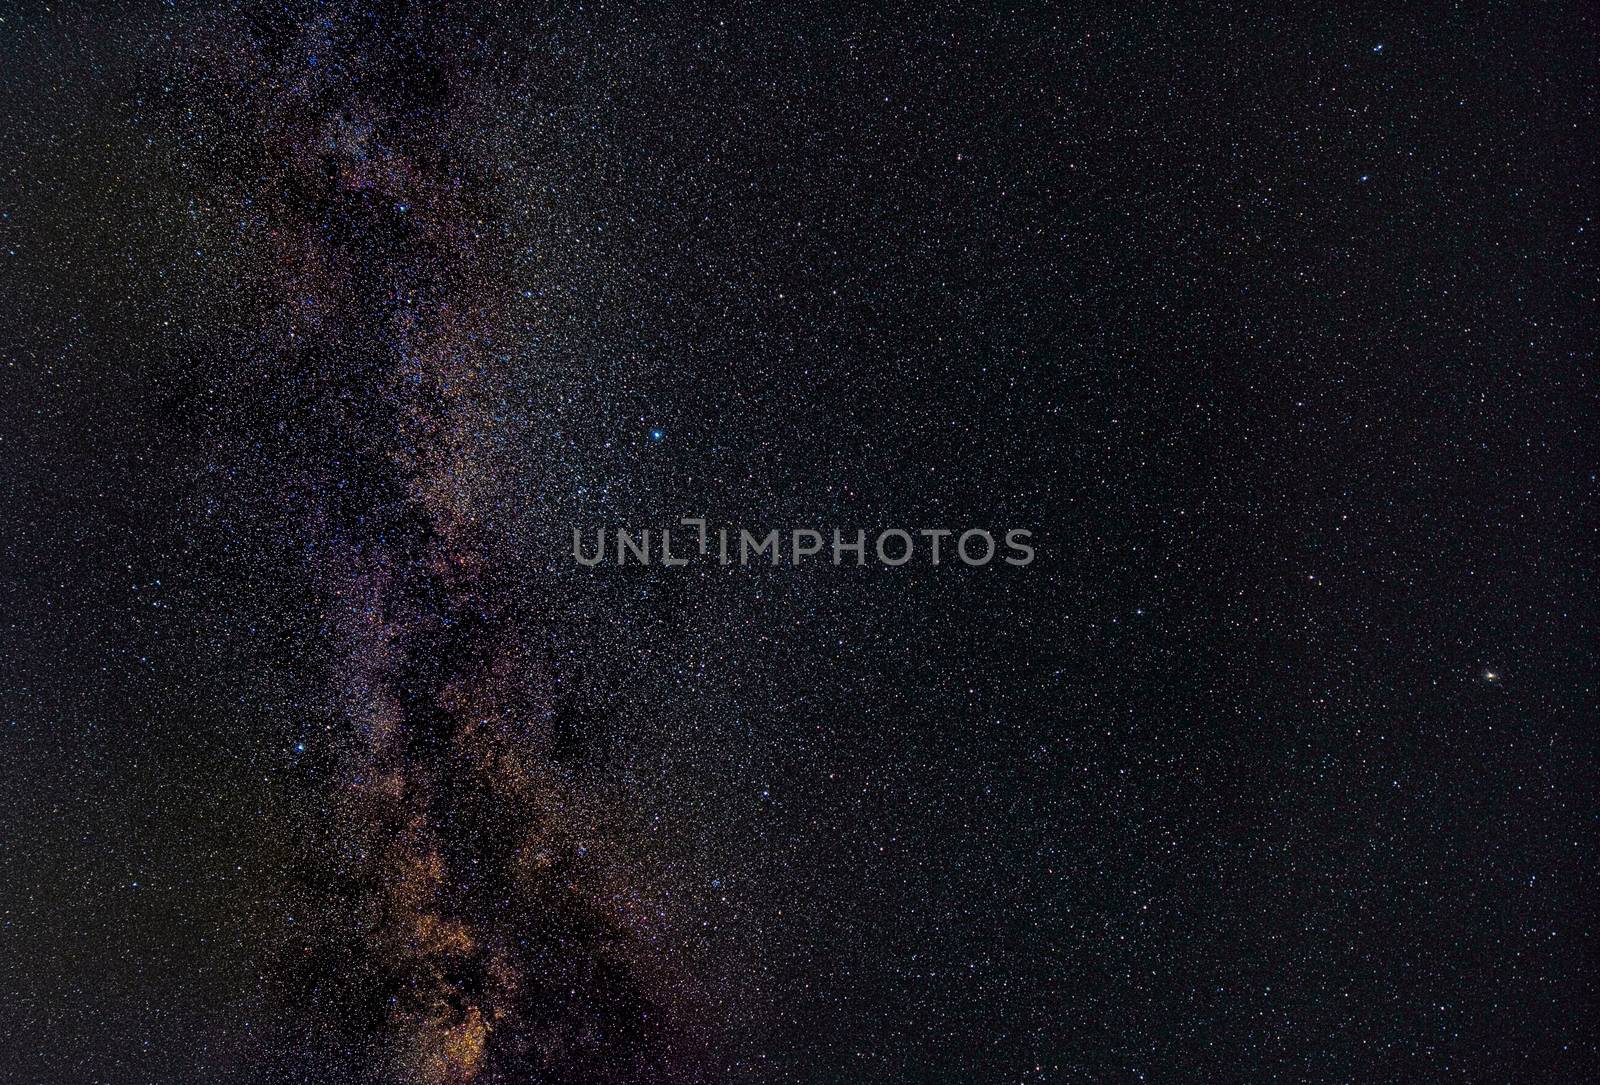 The Milky Way and a million other stars